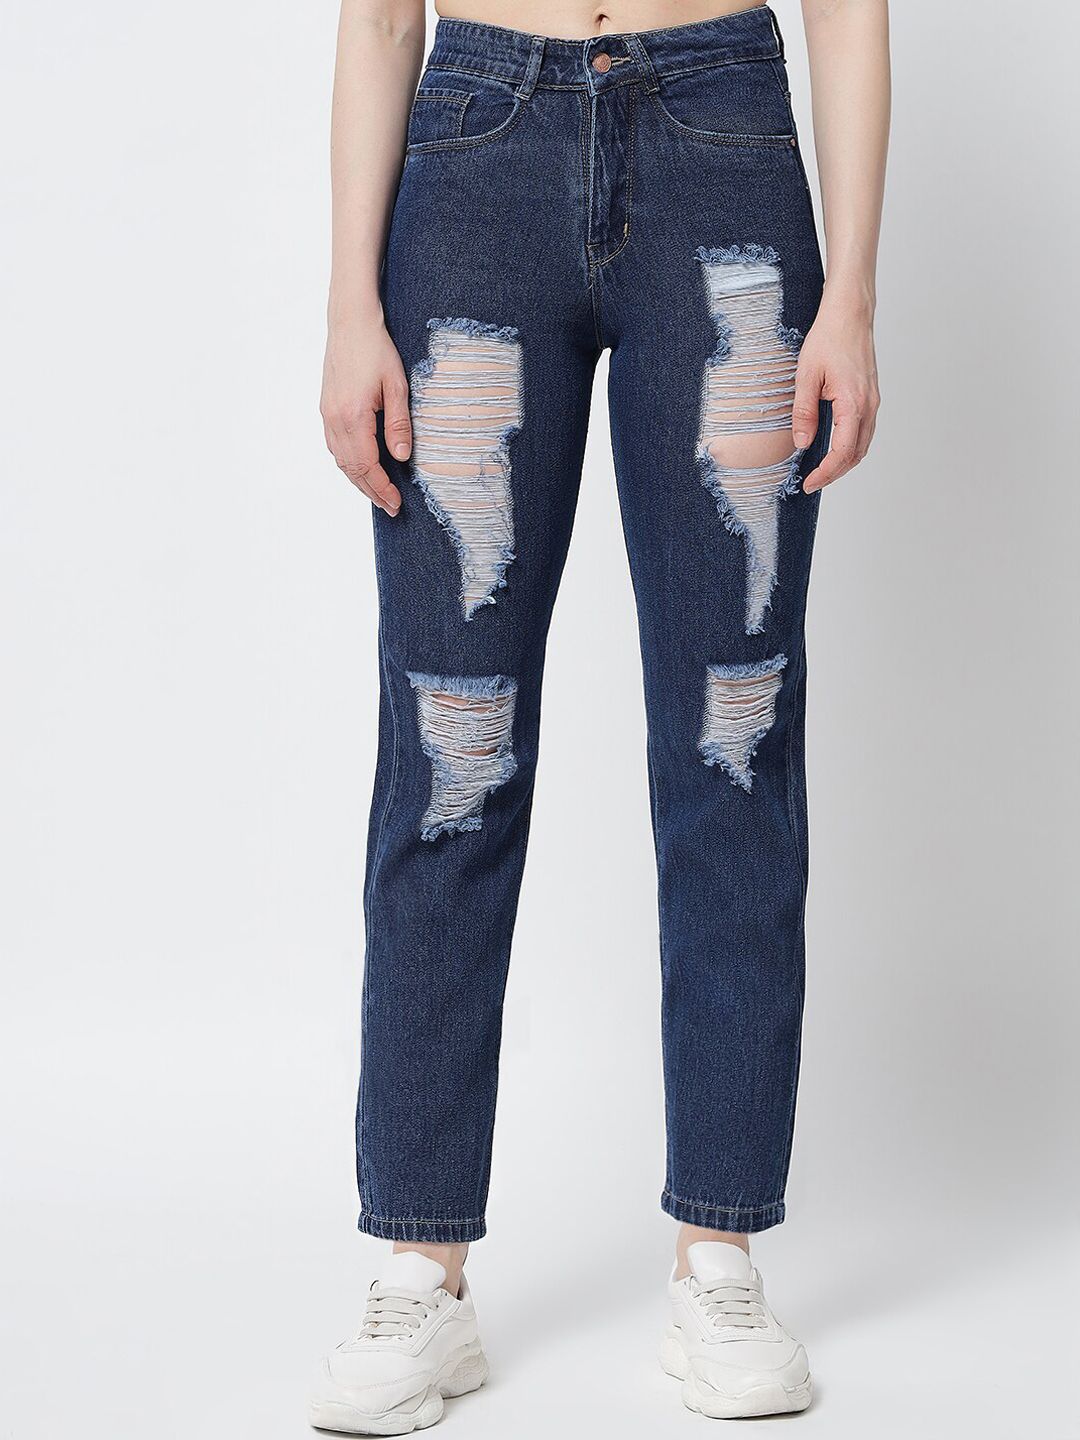 River Of Design Jeans Women Blue Mom Fit High-Rise Highly Distressed Cropped Cotton Jeans Price in India